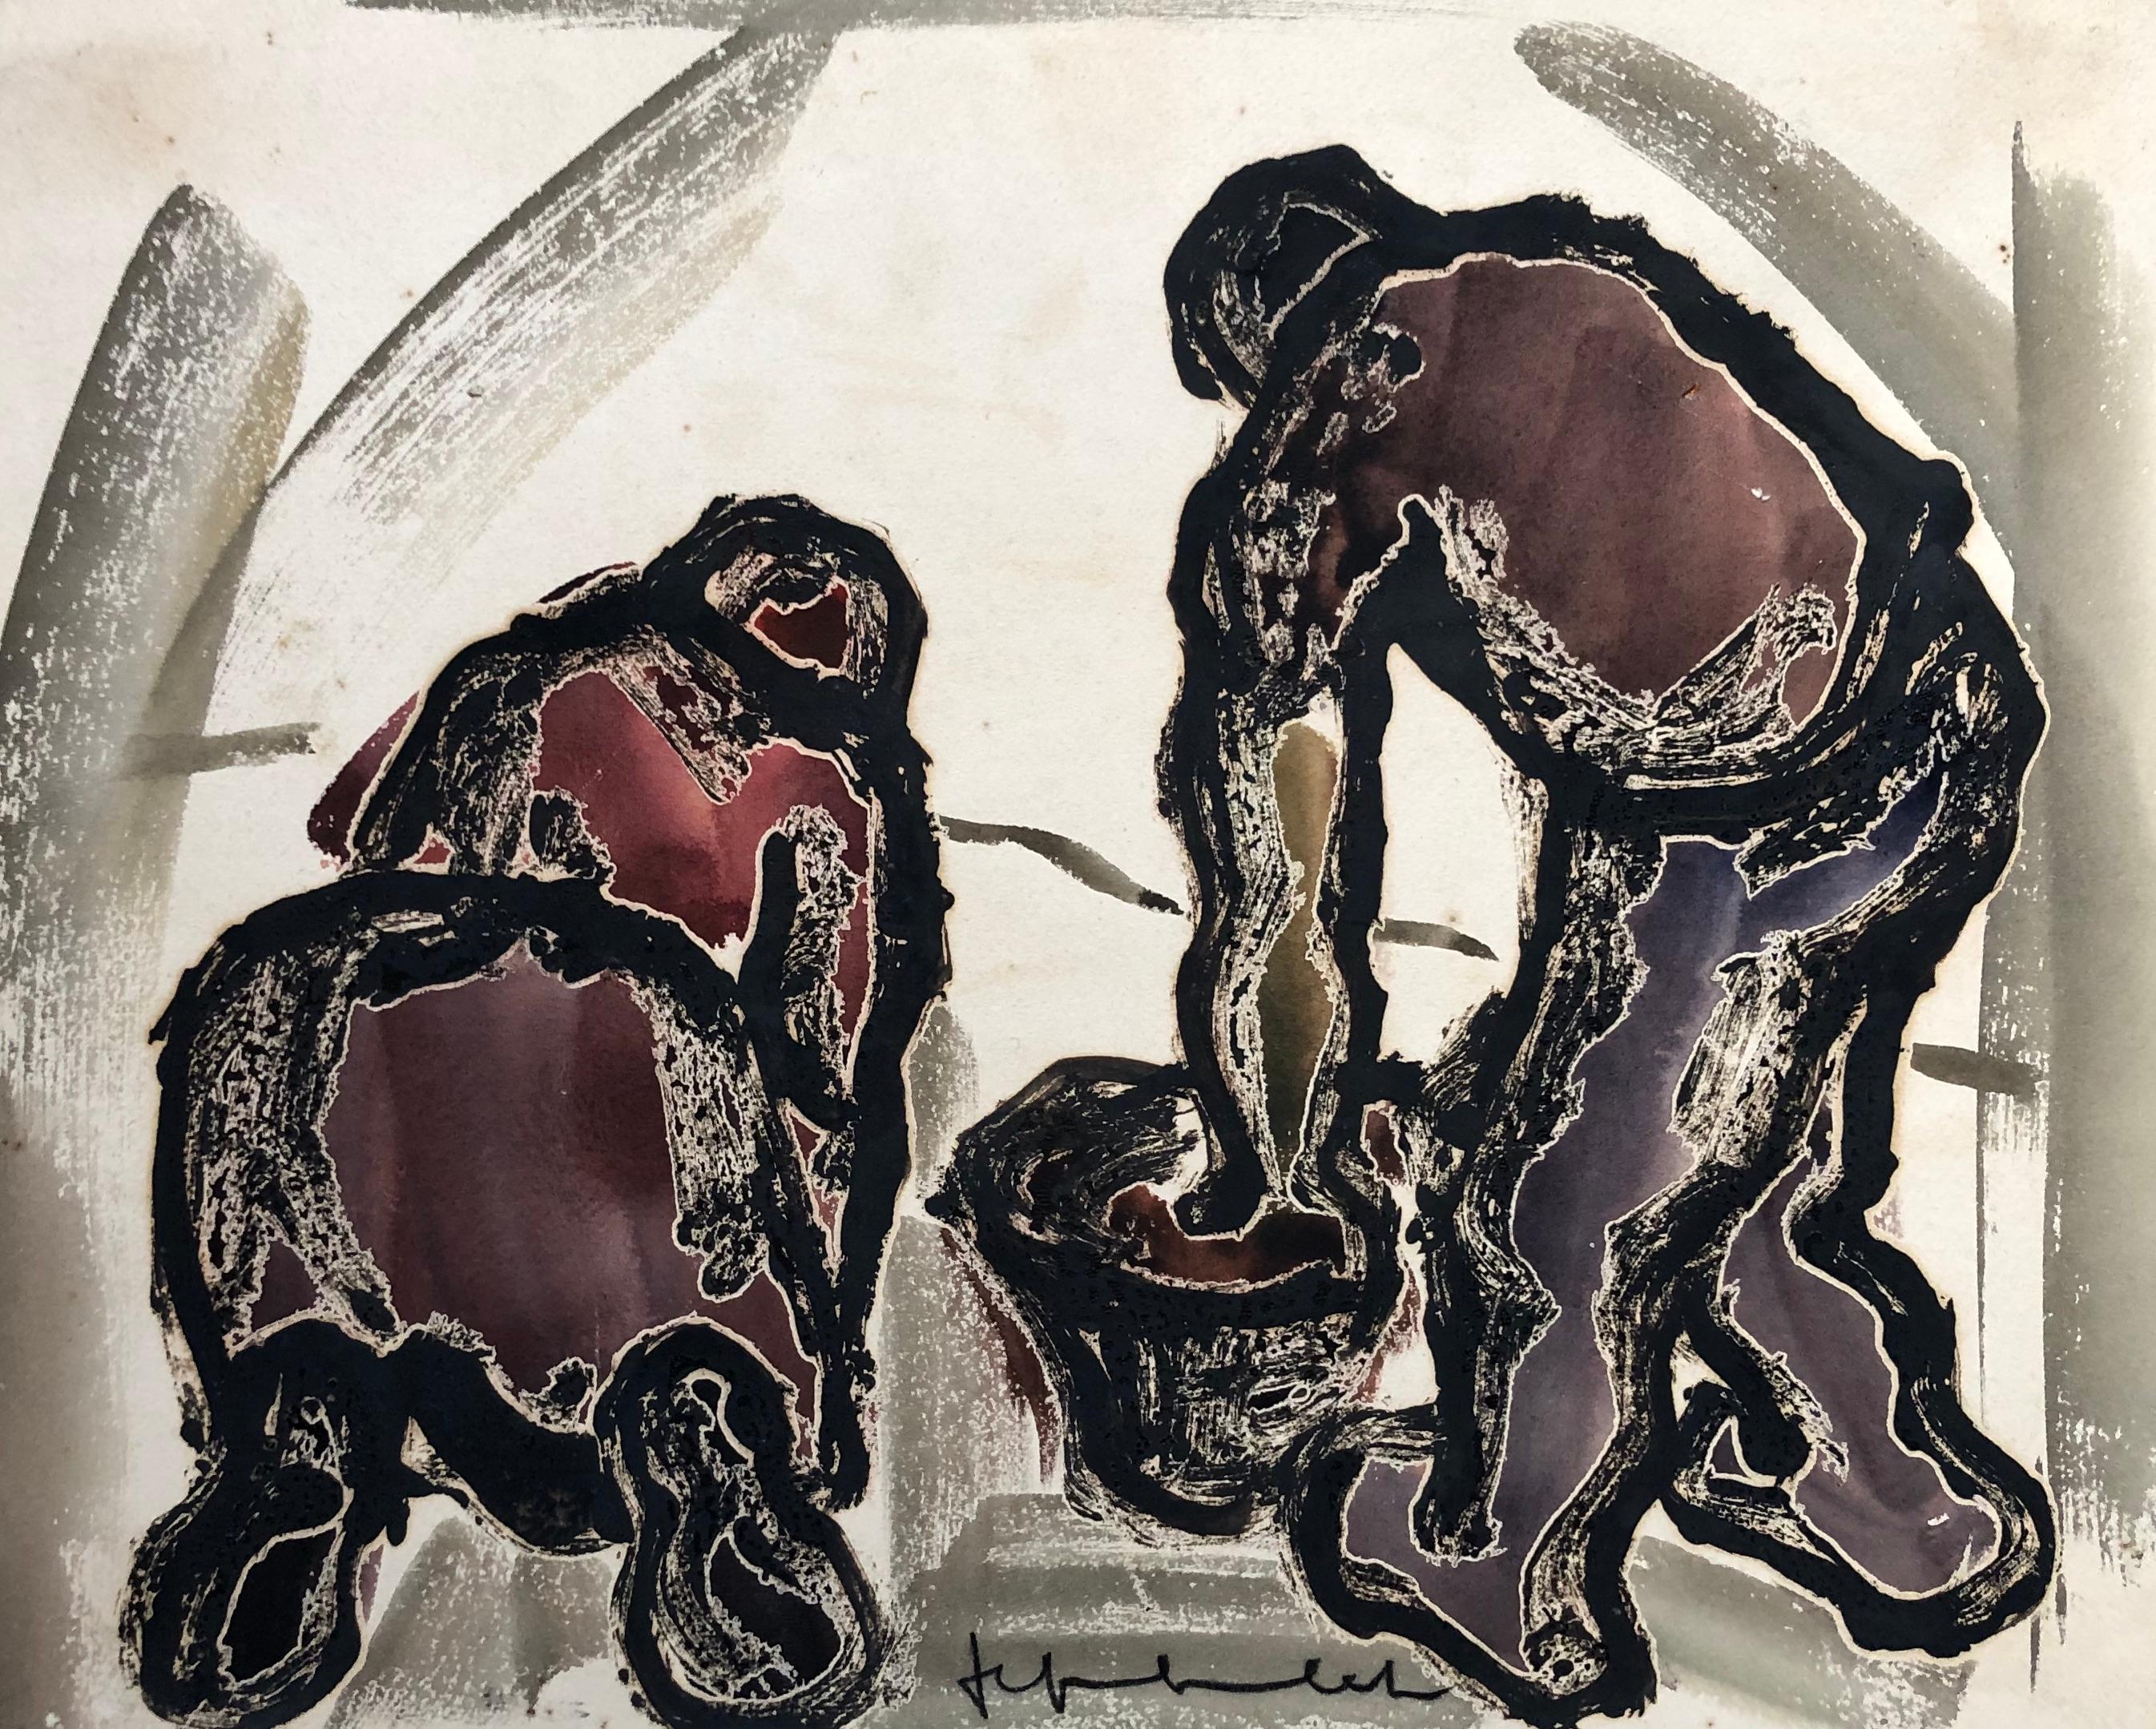 Jef FRIBOULET (1919-2003)
Characters at work.
Gouache and watercolor on paper.
Small dirt.